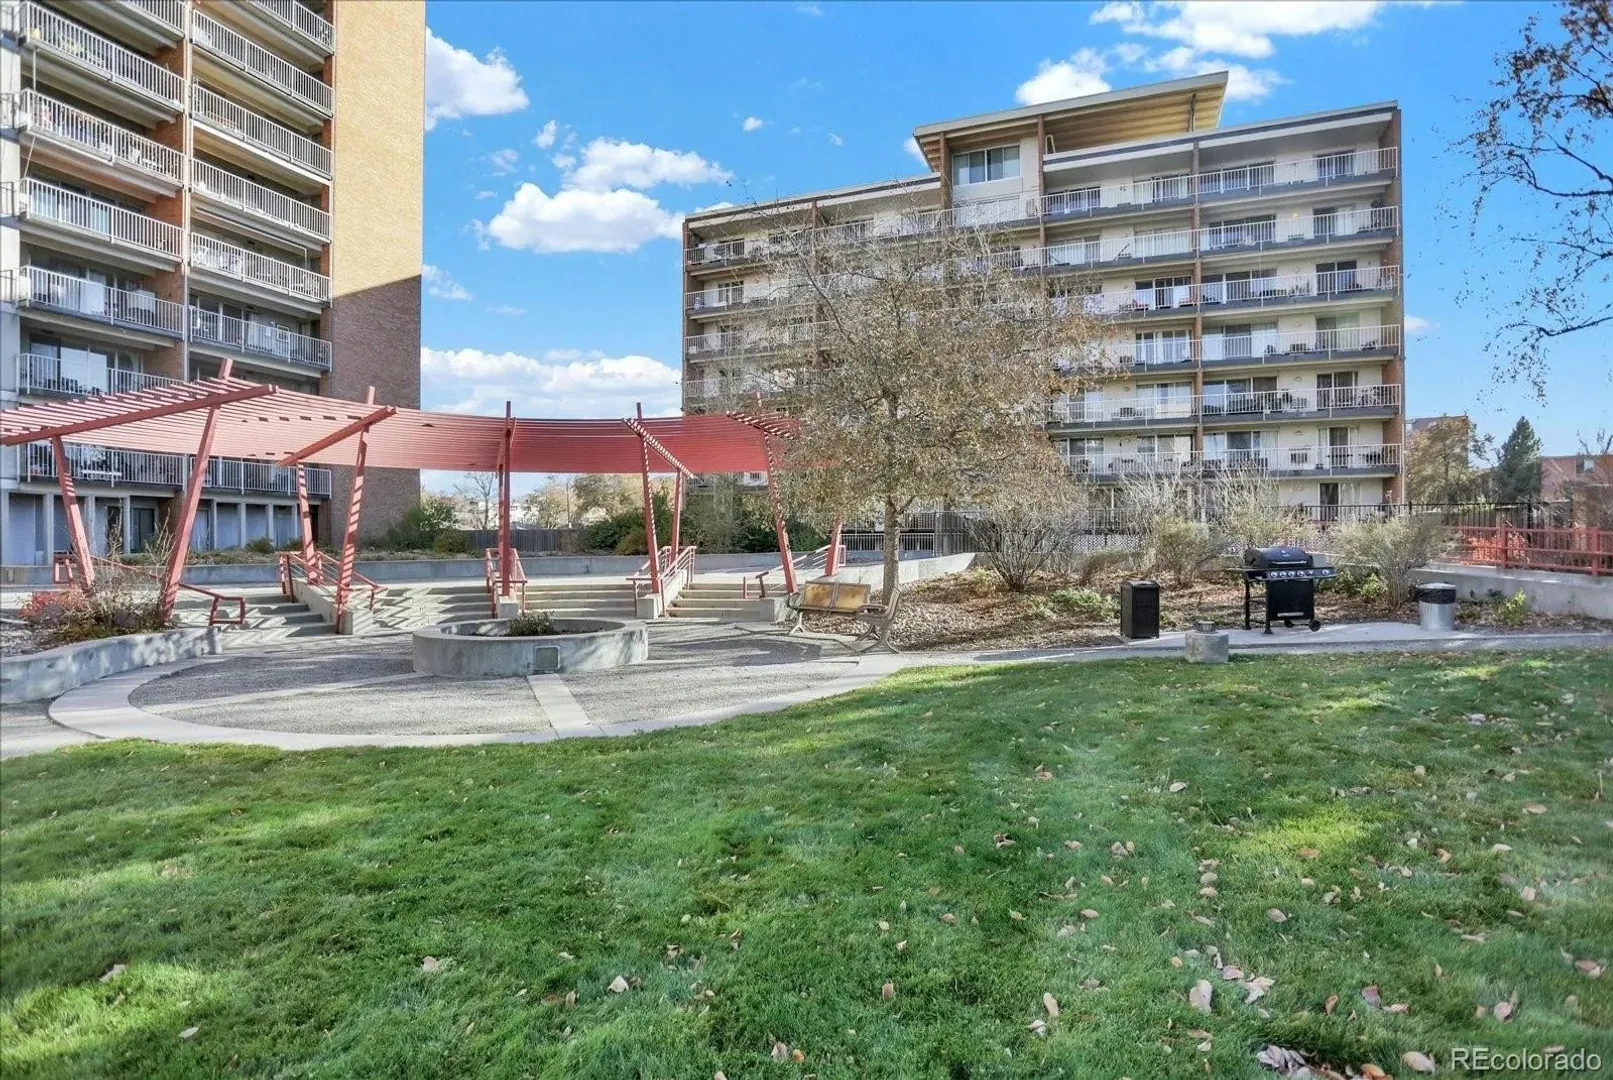 Apartments Near Argosy University-Denver 1 bed/1 bath near Rose Medical - Parking and Amenities! for Argosy University-Denver Students in Denver, CO